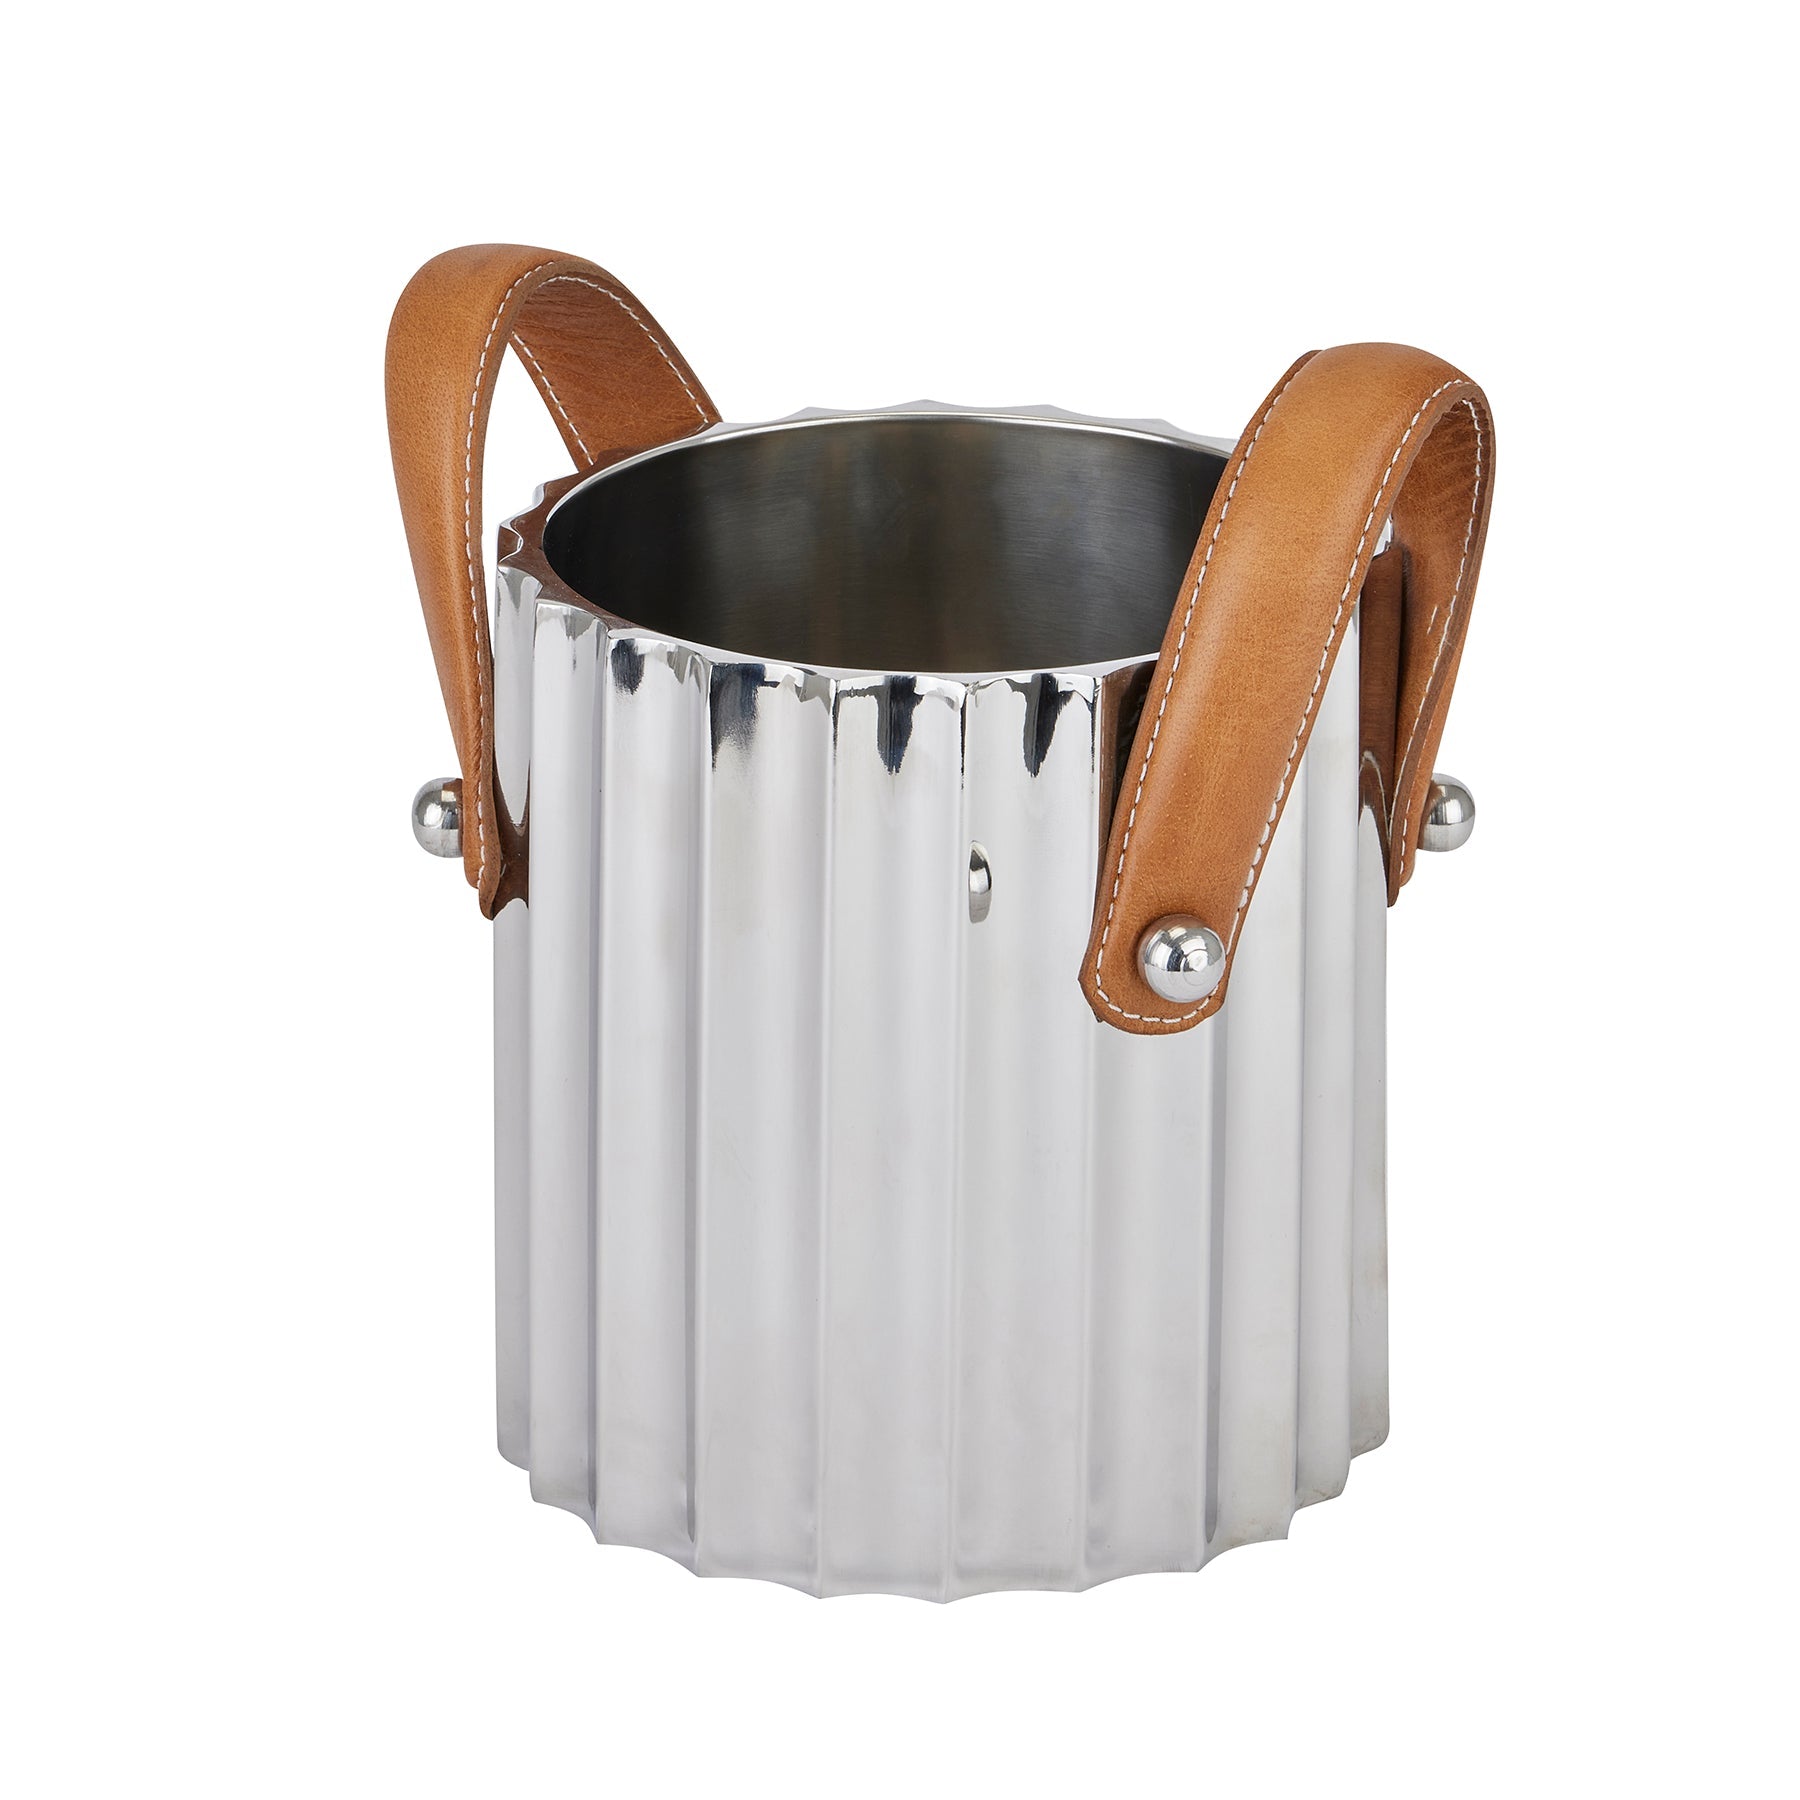 Silver Fluted Ice Bucket with Leather Handle - Small - Duck Barn Interiors